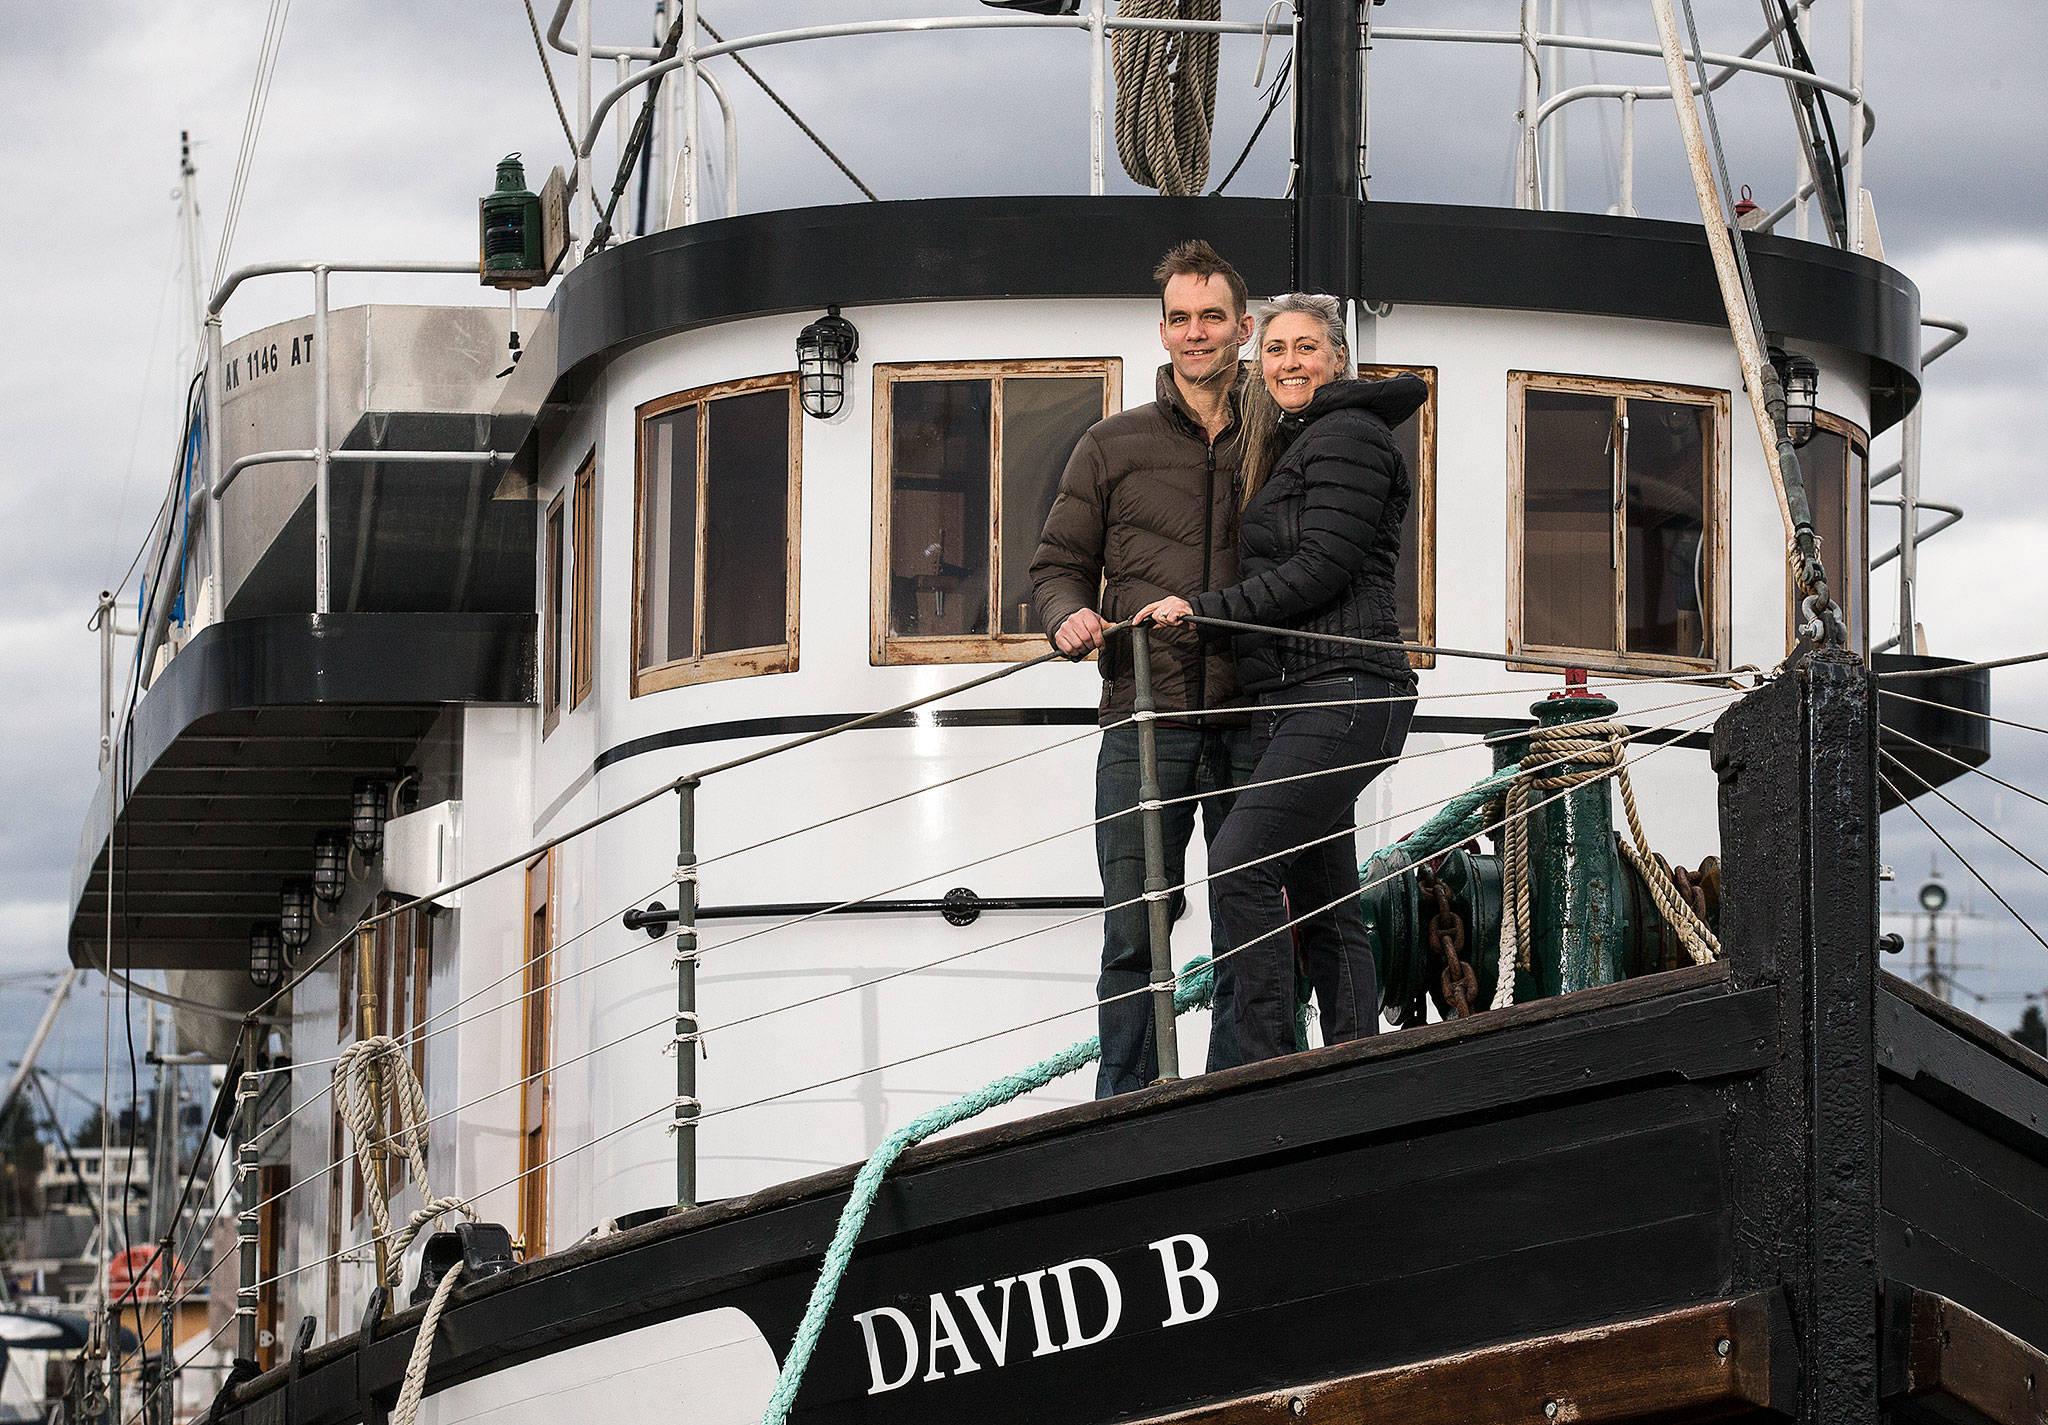 Jeffrey and Christine Smith stand on their ship, the David B. Motor Vessel, in Bellingham. The couple will be speaking about the 1929 ship they restored and now use for tours through southeast Alaska. (Andy Bronson / The Herald)